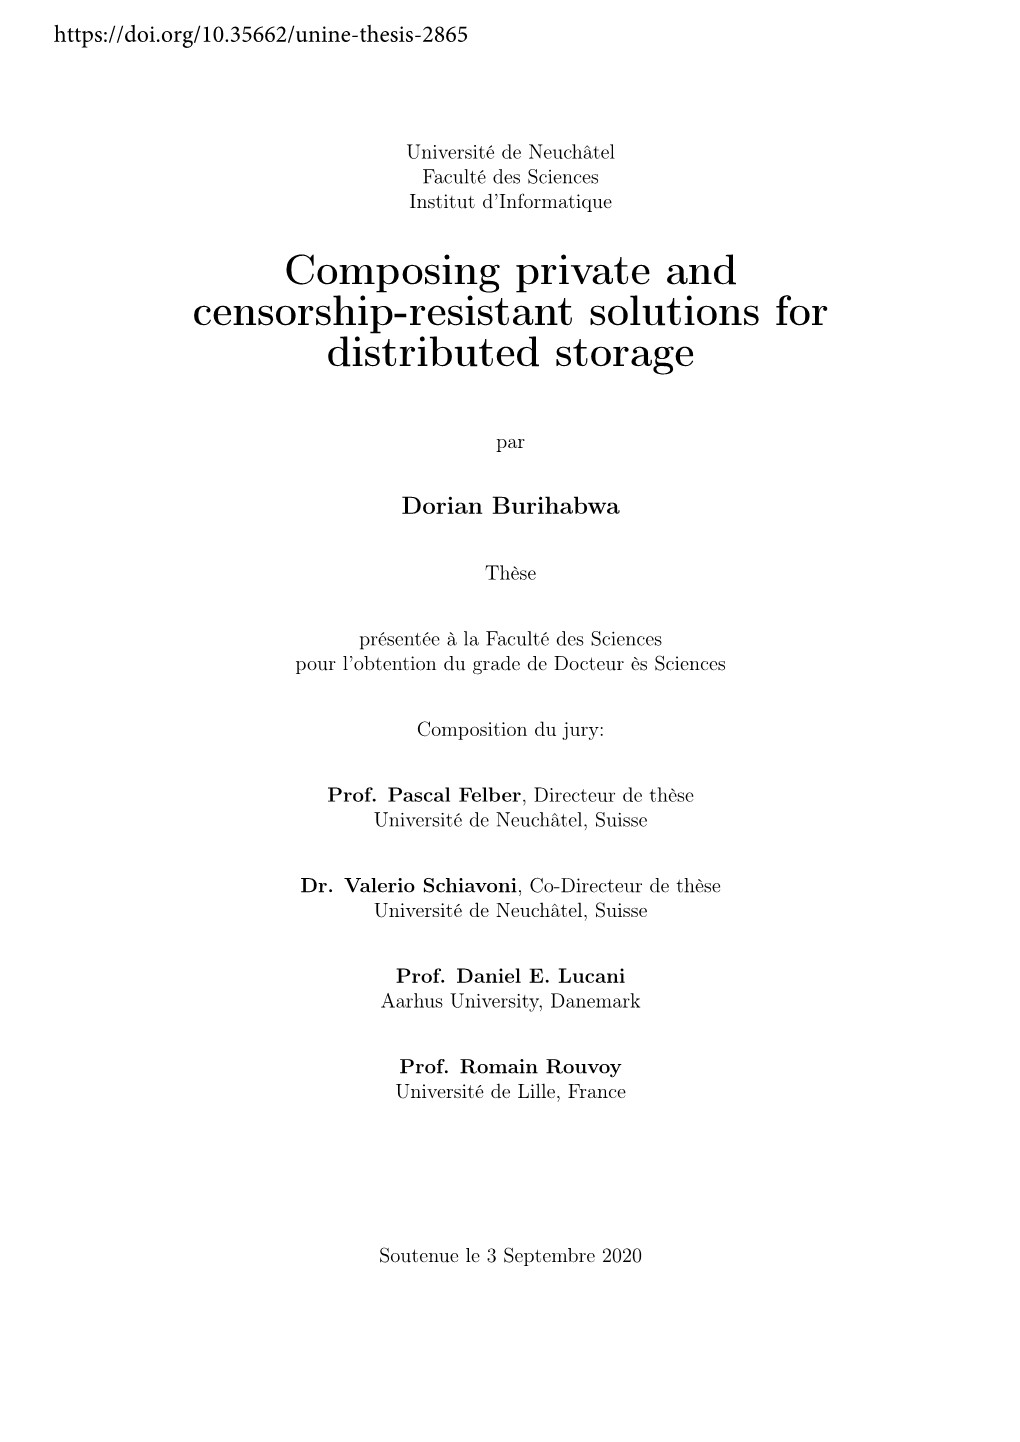 Composing Private and Censorship-Resistant Solutions for Distributed Storage